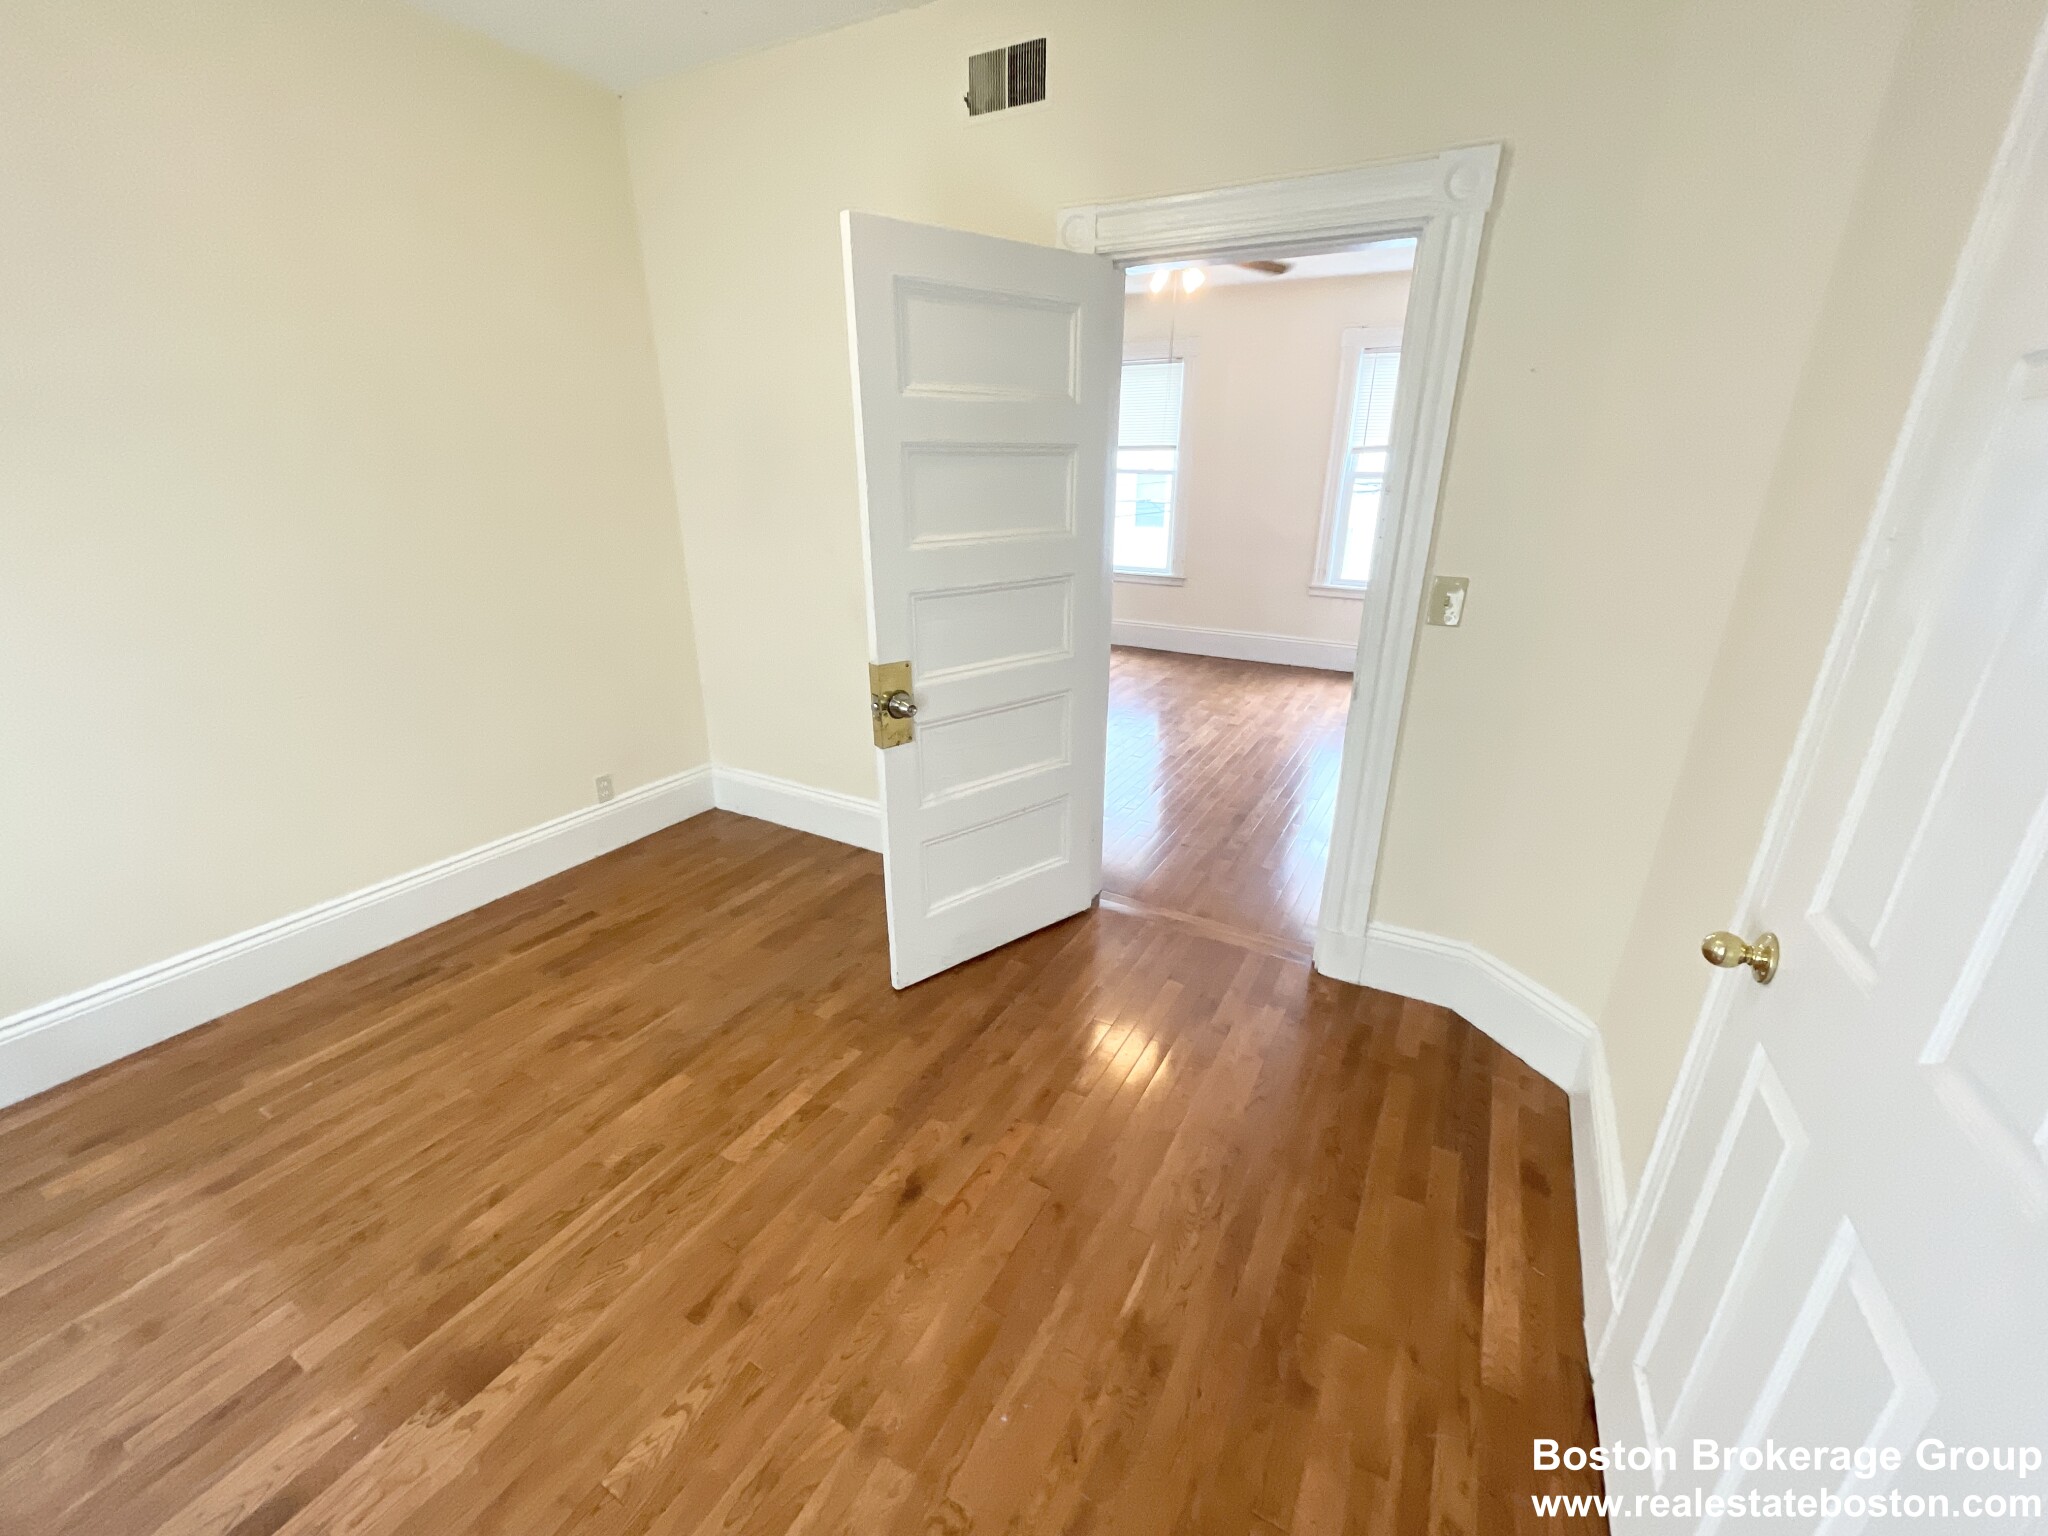 Photos of apartment on Crescent Ave.,Boston MA 02125